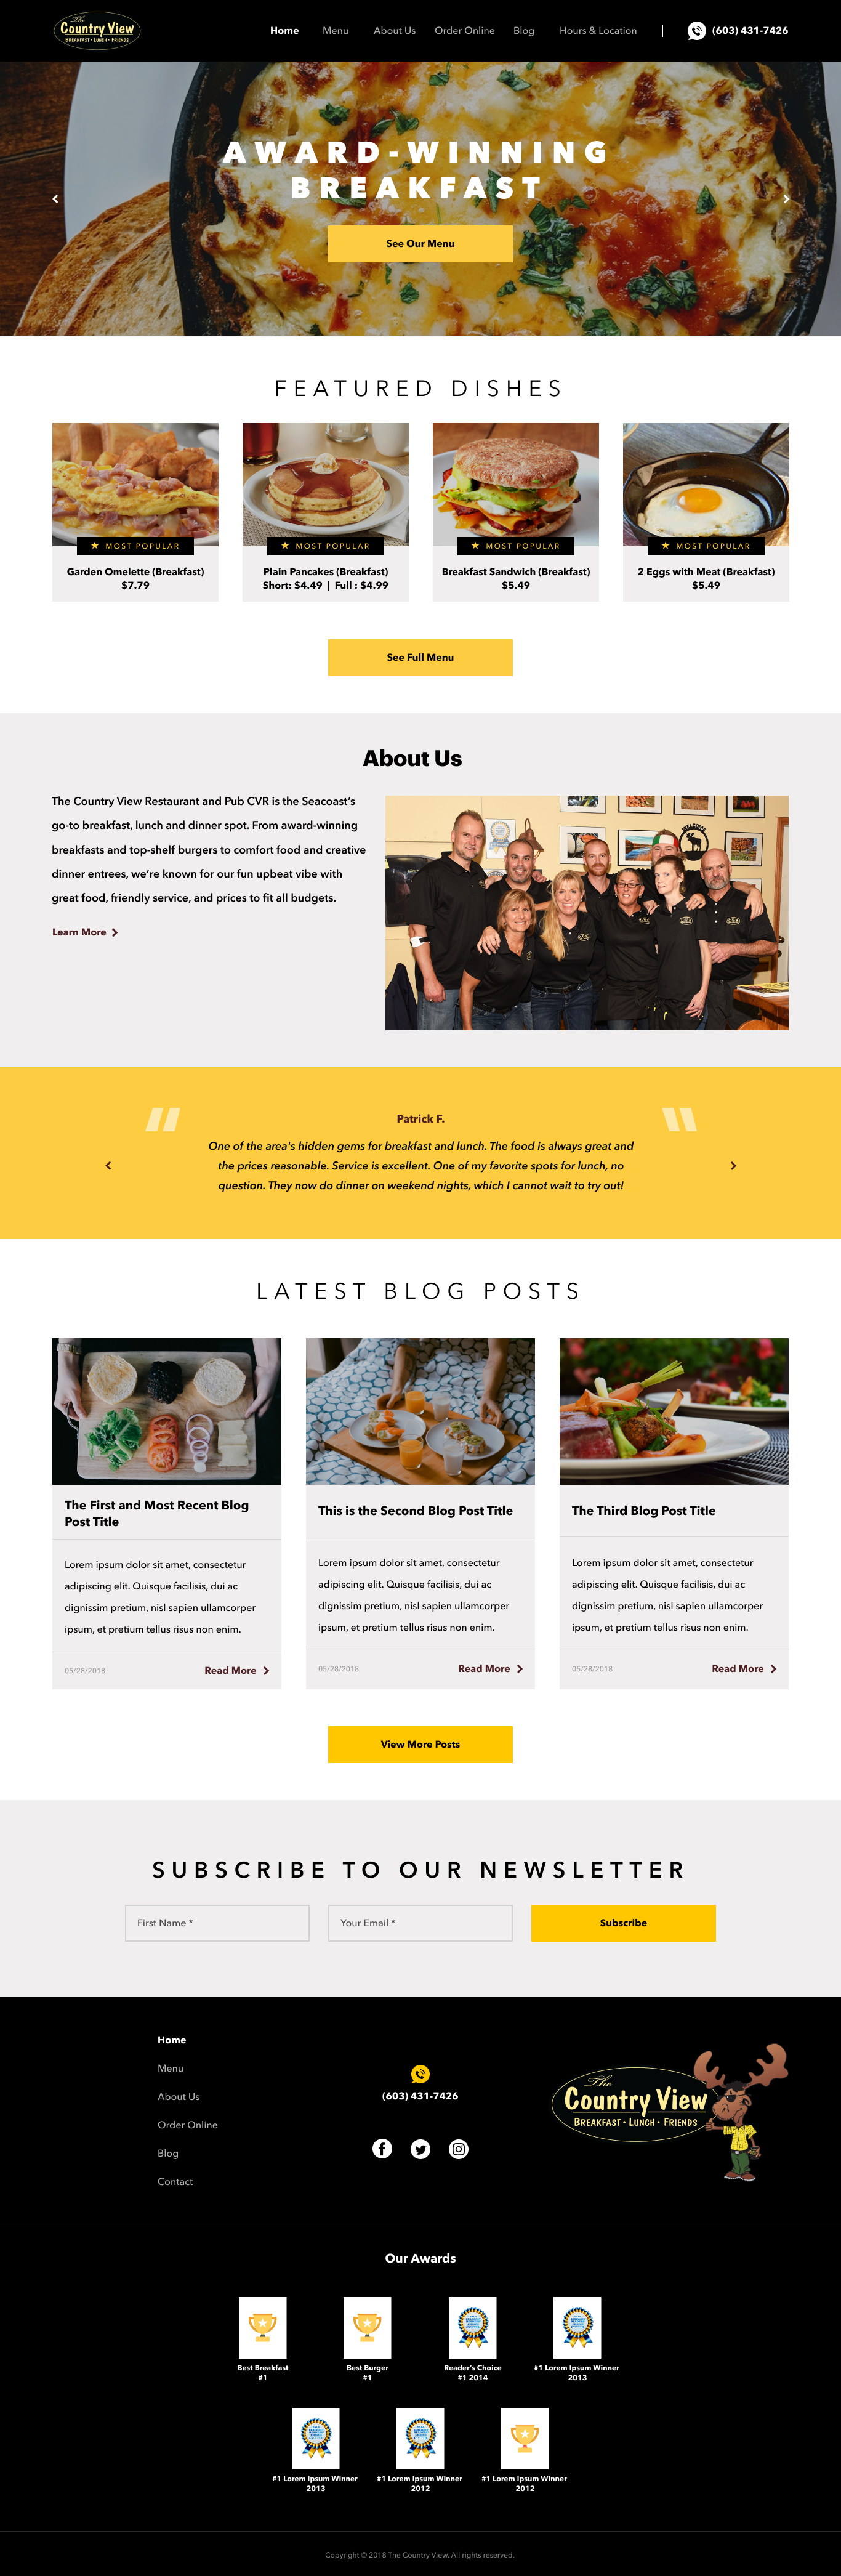 The Country View Restaurant Home Page Design